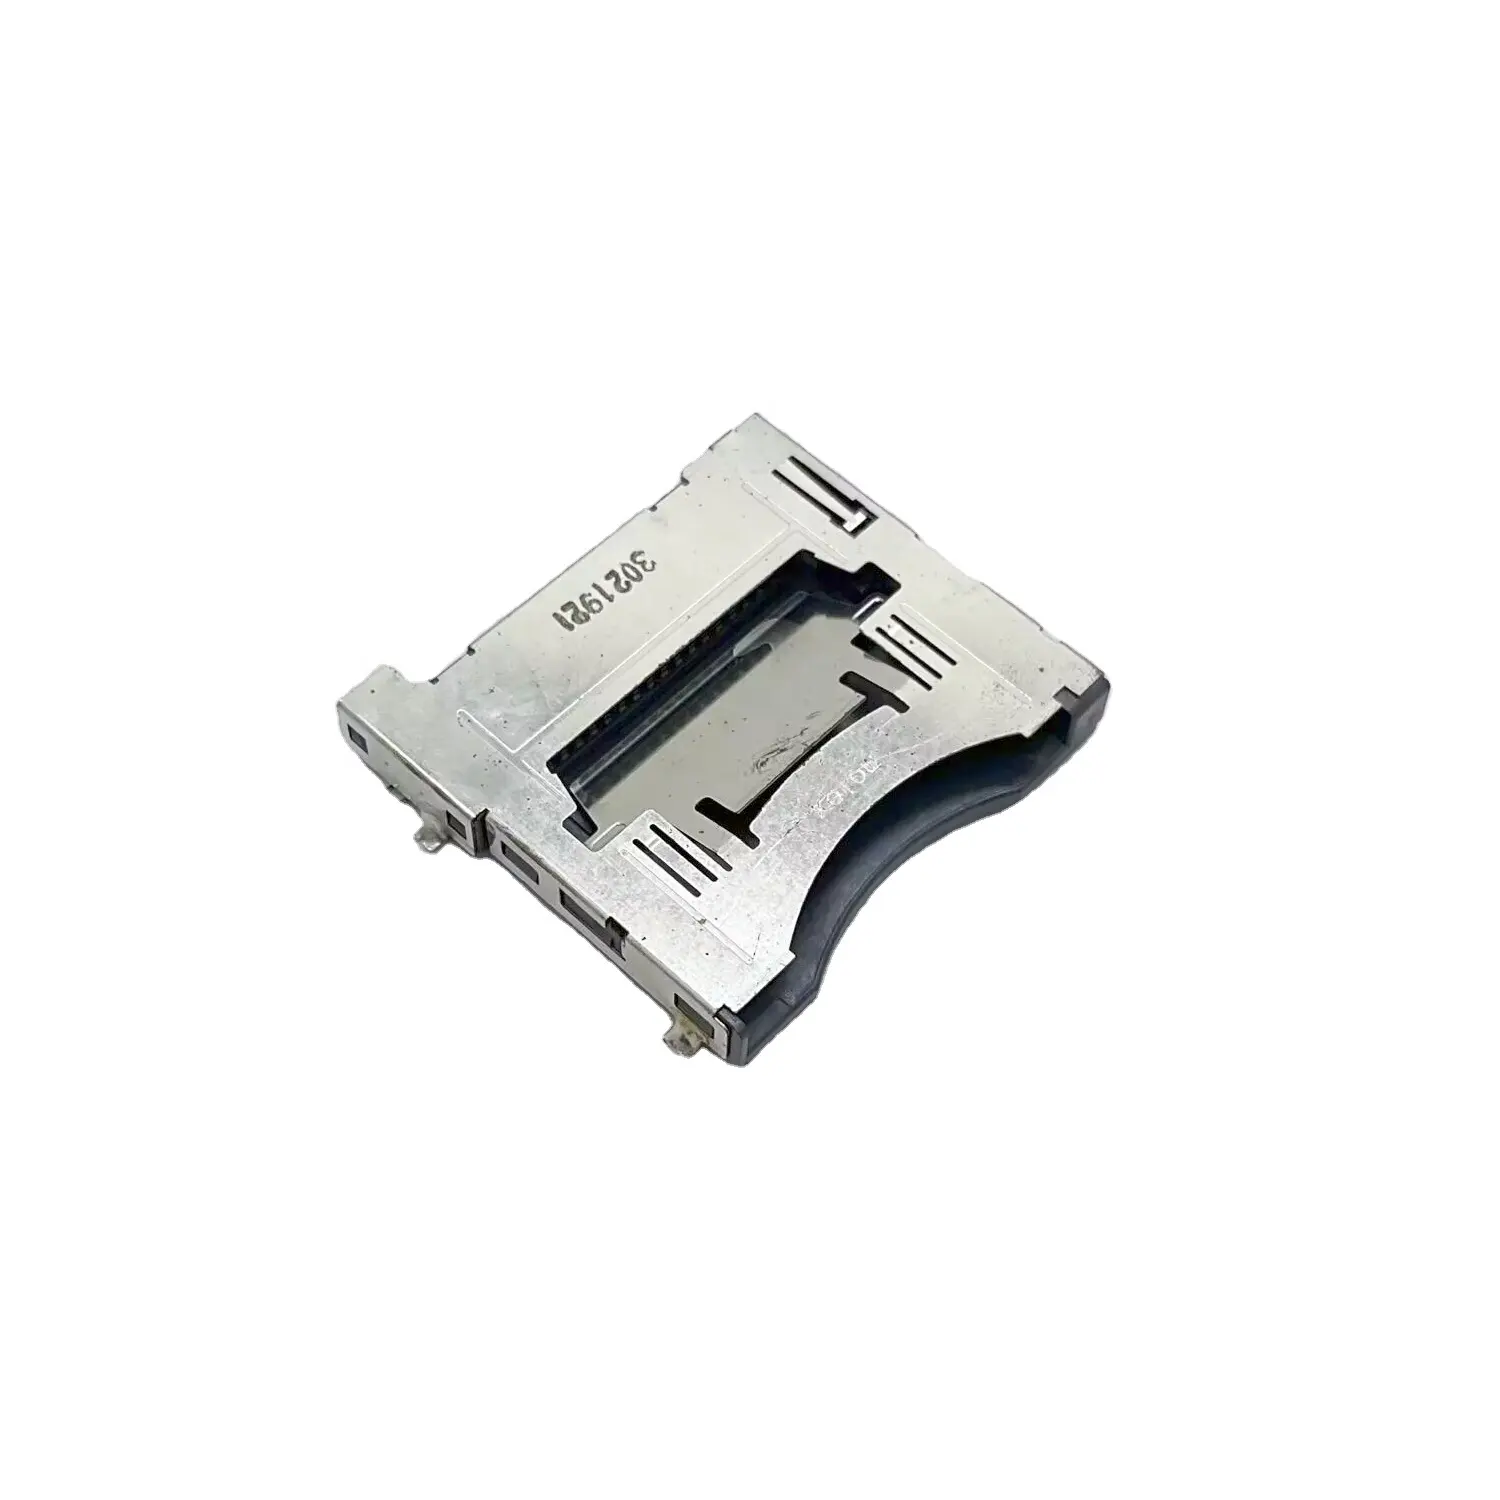 Original Pulled for 3DS XL Game Reader for Nintendo 3DS 3DS XL Game Card slot socket replacement